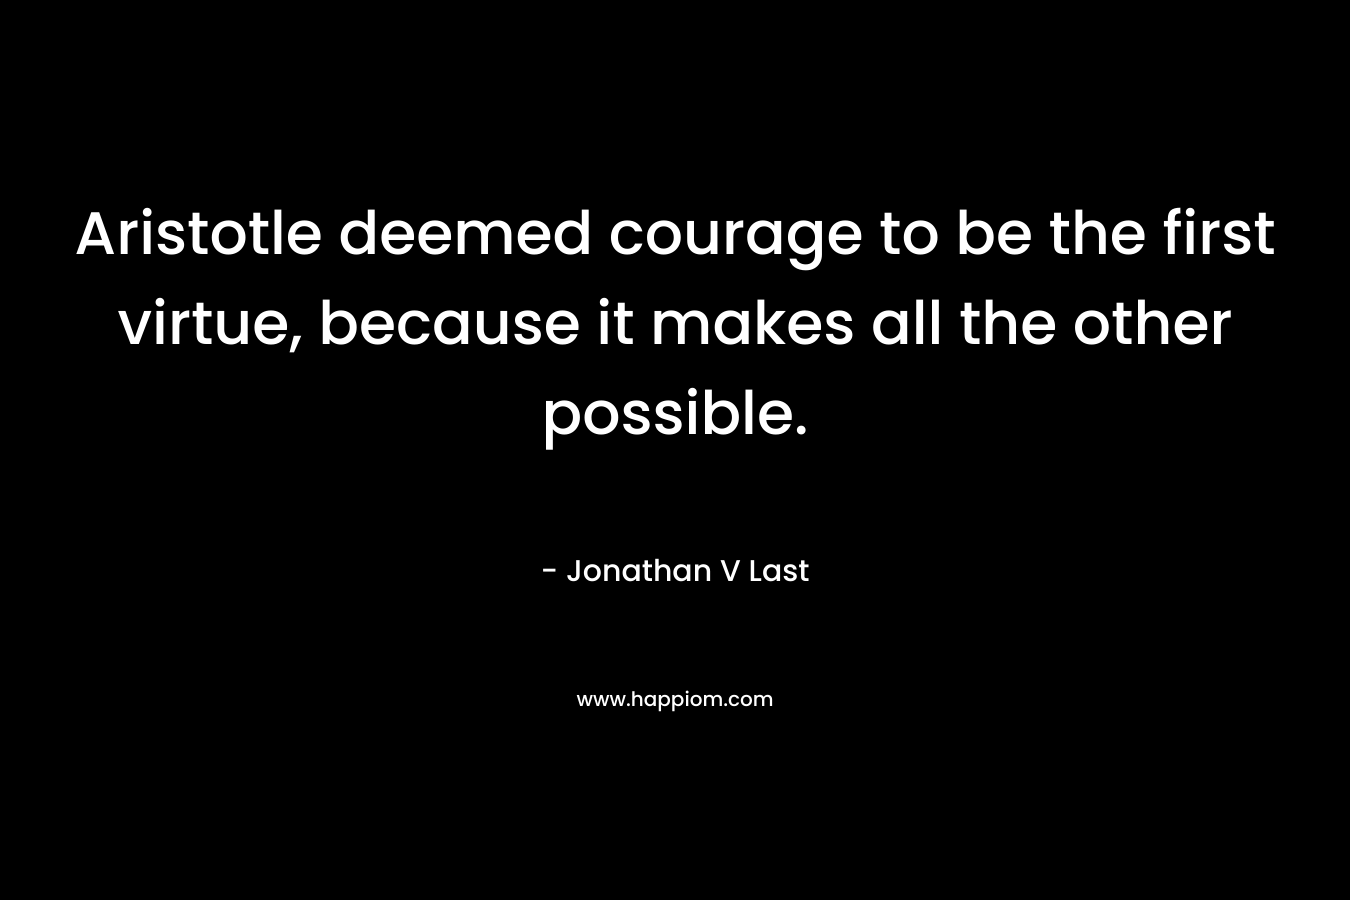 Aristotle deemed courage to be the first virtue, because it makes all the other possible.